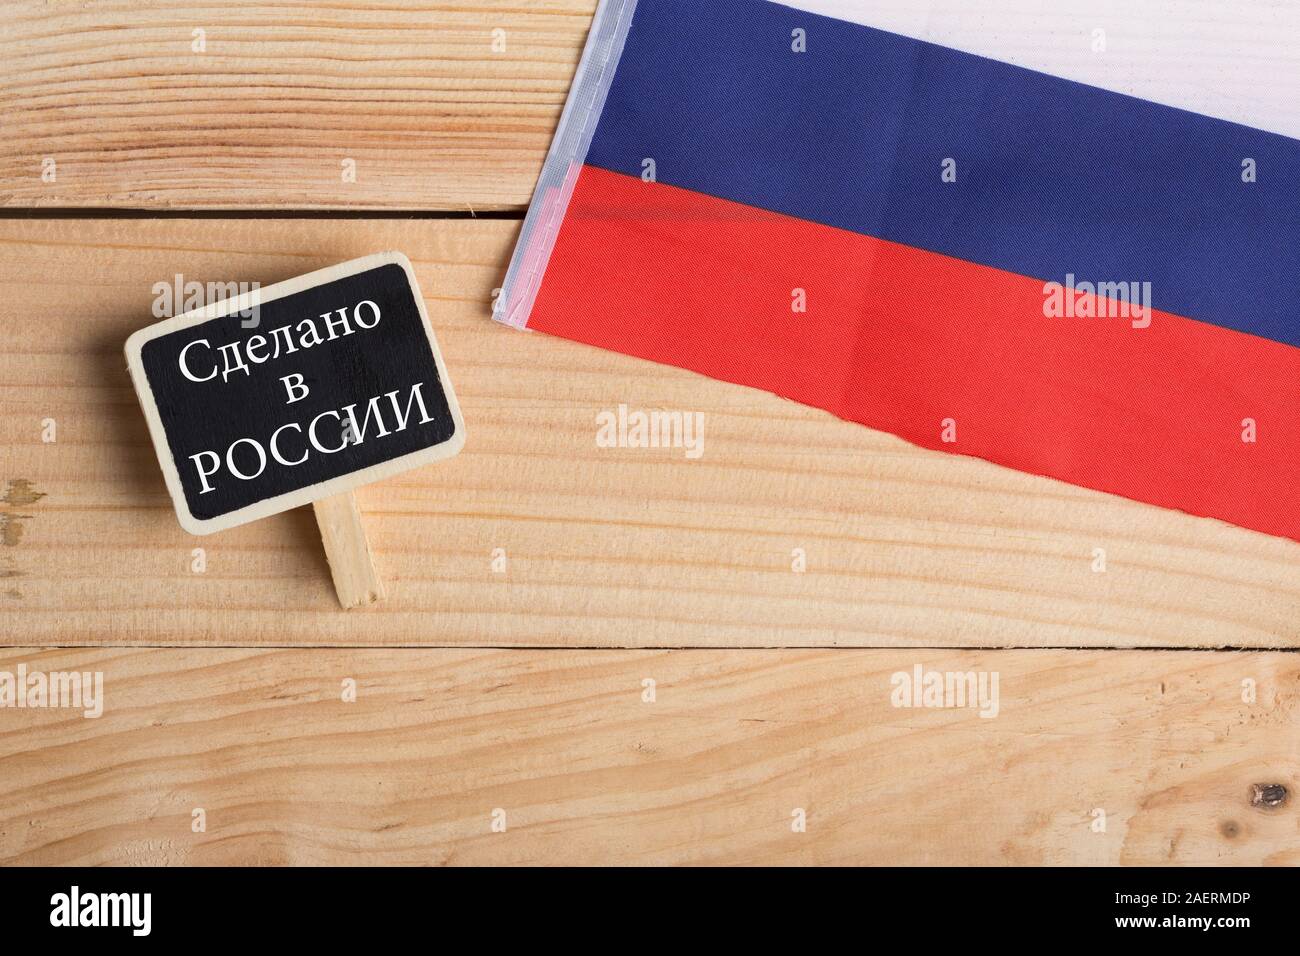 goods and services concept - russian country's flag, blackboard with text in russian language Made in Russia on wooden background Stock Photo